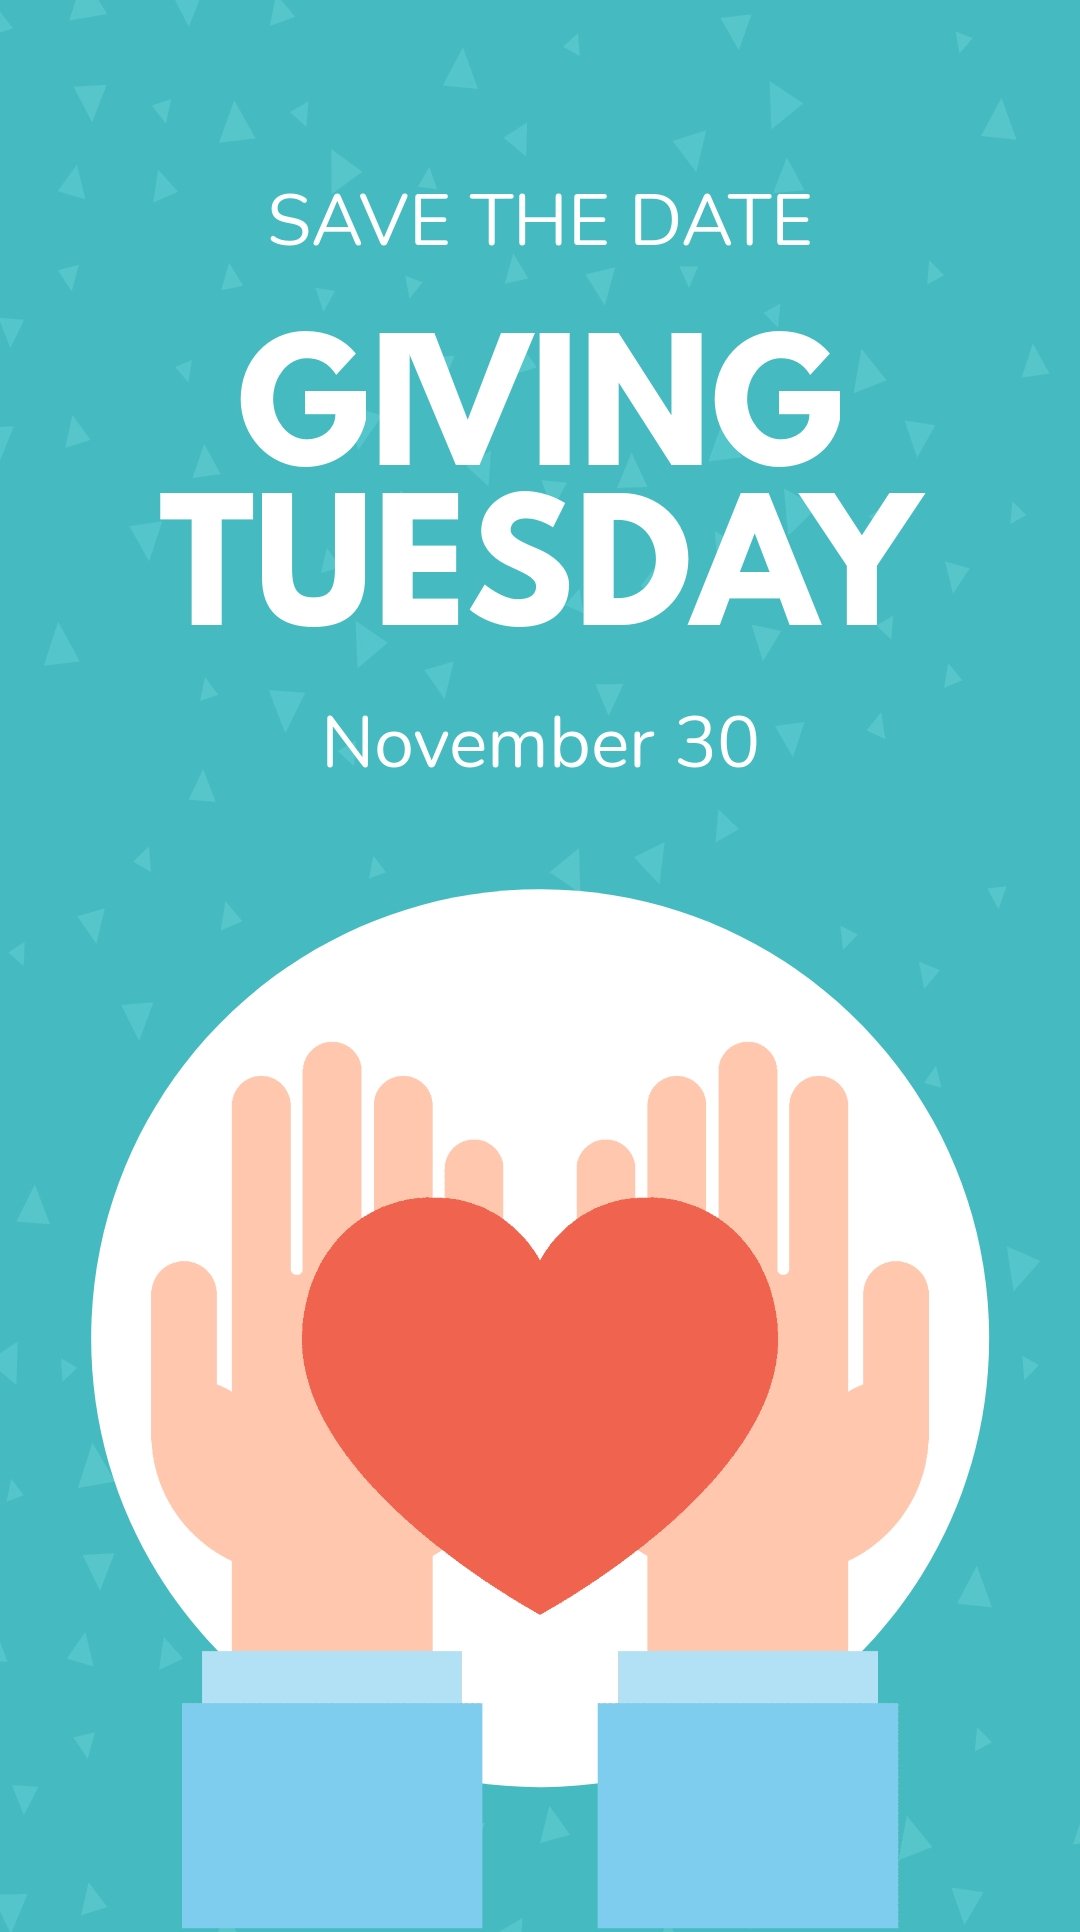 Free Giving Tuesday Instagram Story Template Download in PNG, JPG